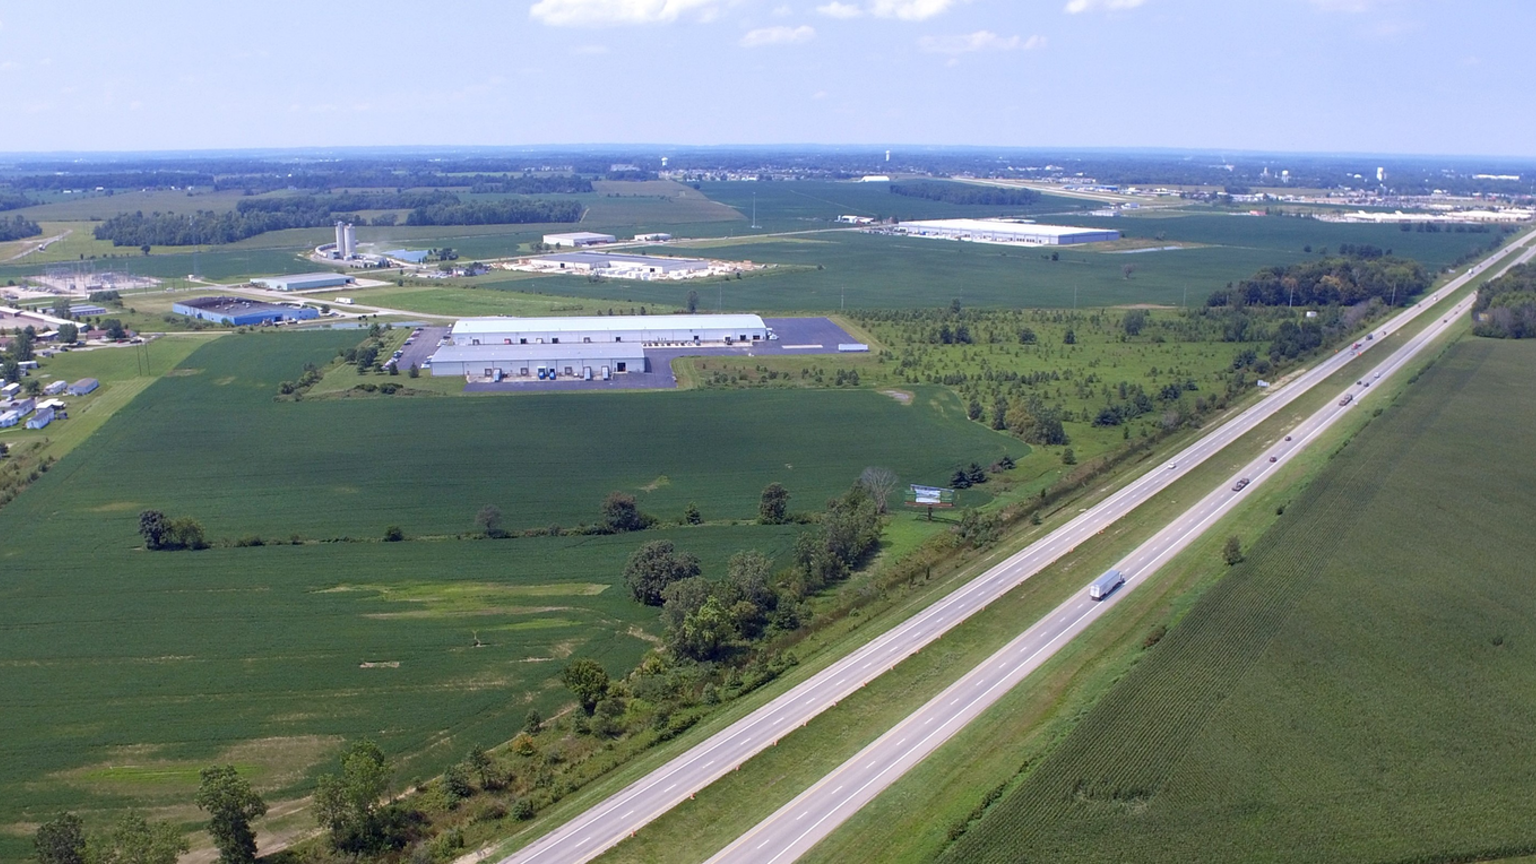 Building a Home for Manufacturing Innovation in Marysville, Ohio